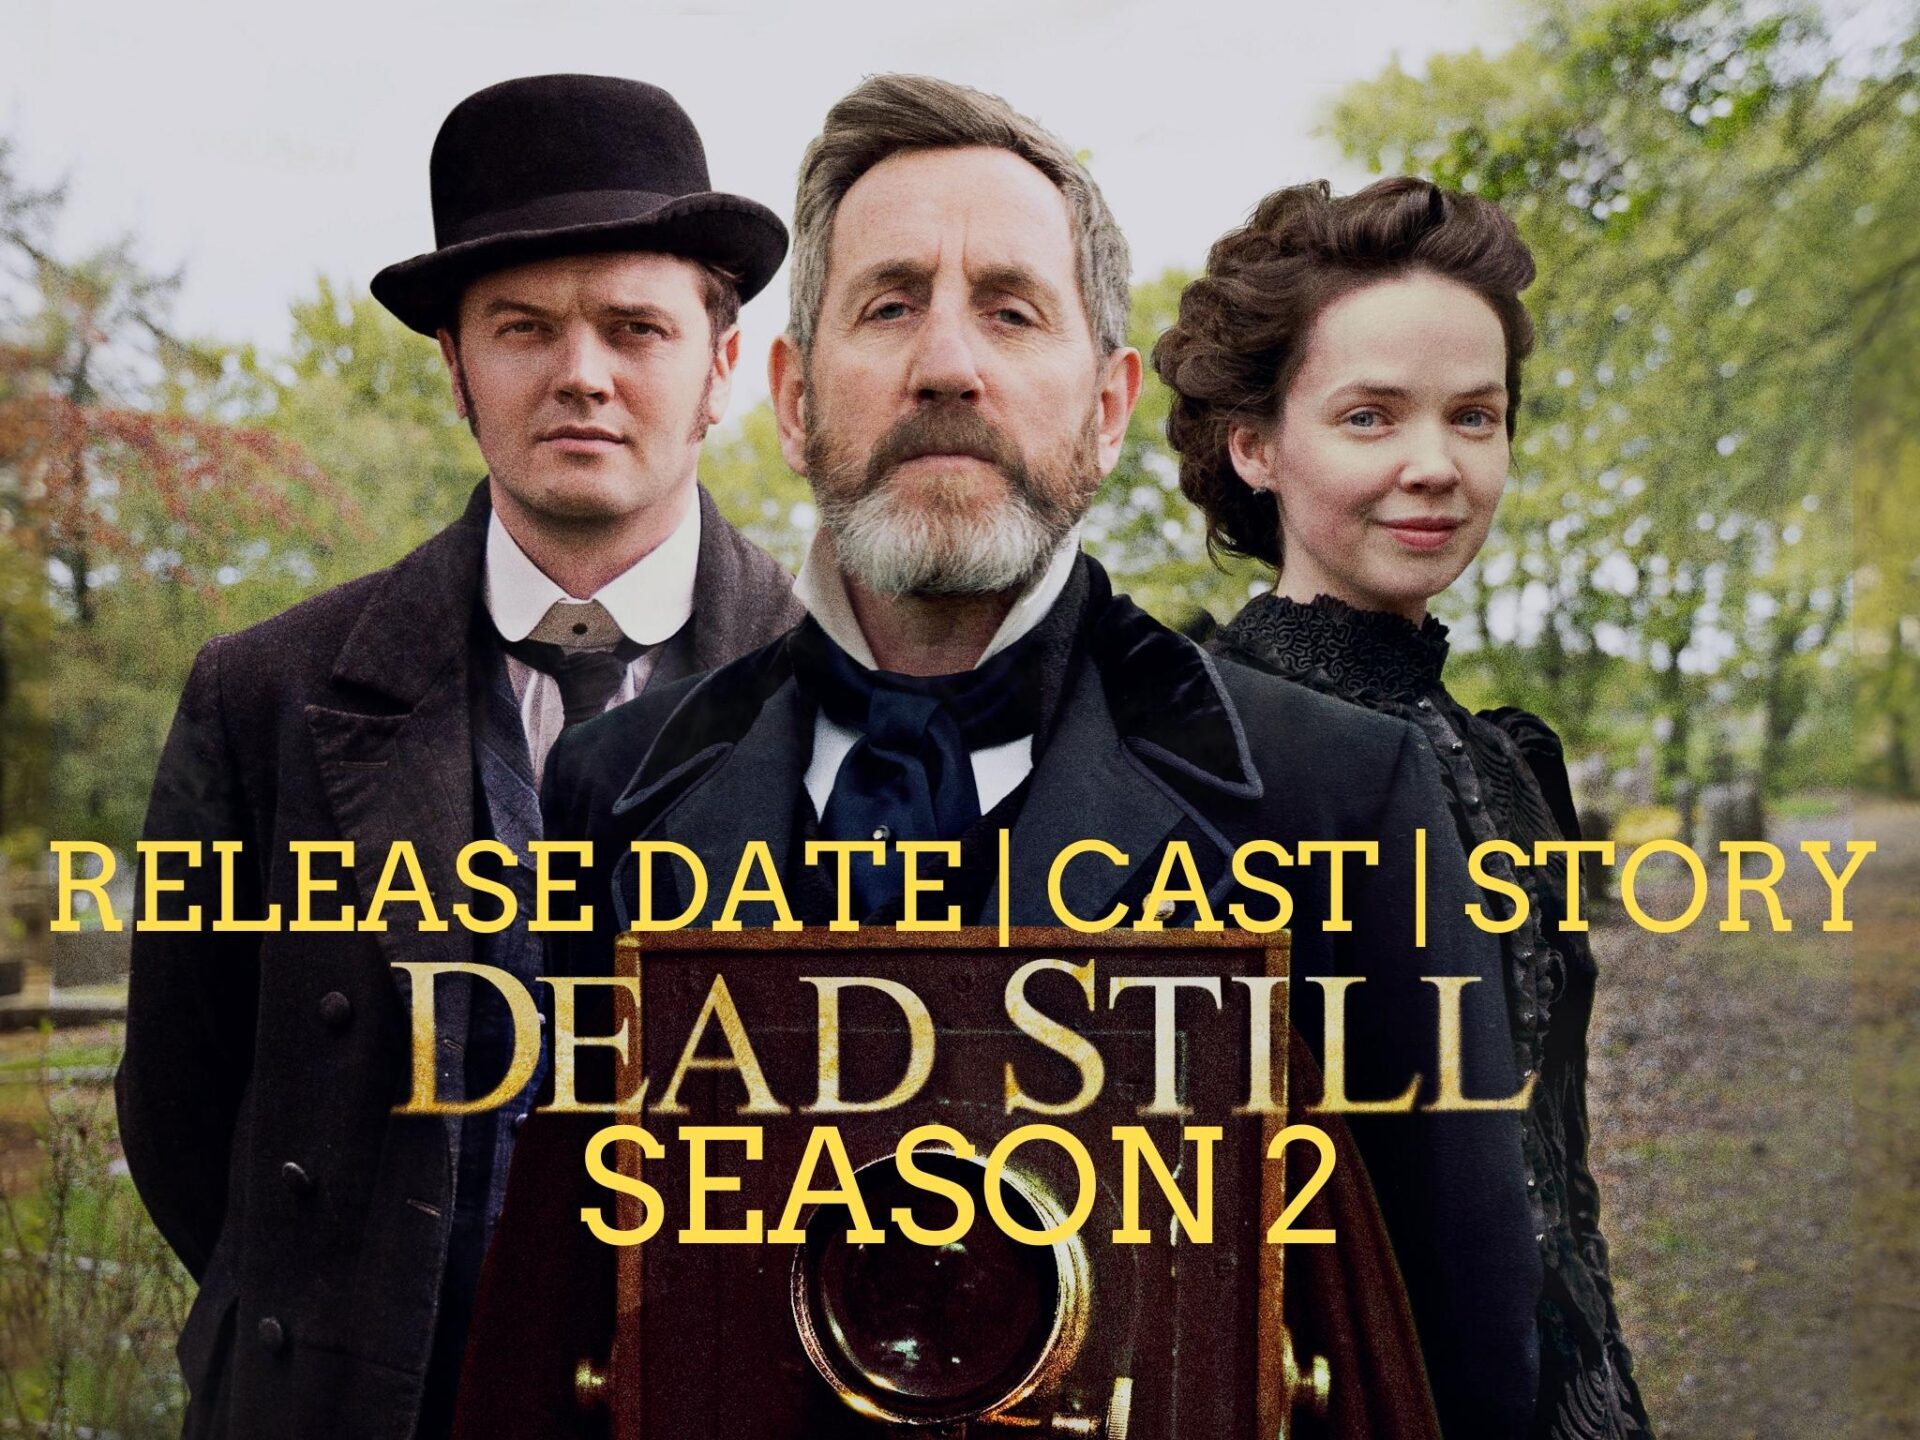 Dead Still Season 2 Release Date, Cast, Storyline, and Every Other Information You Want to Know